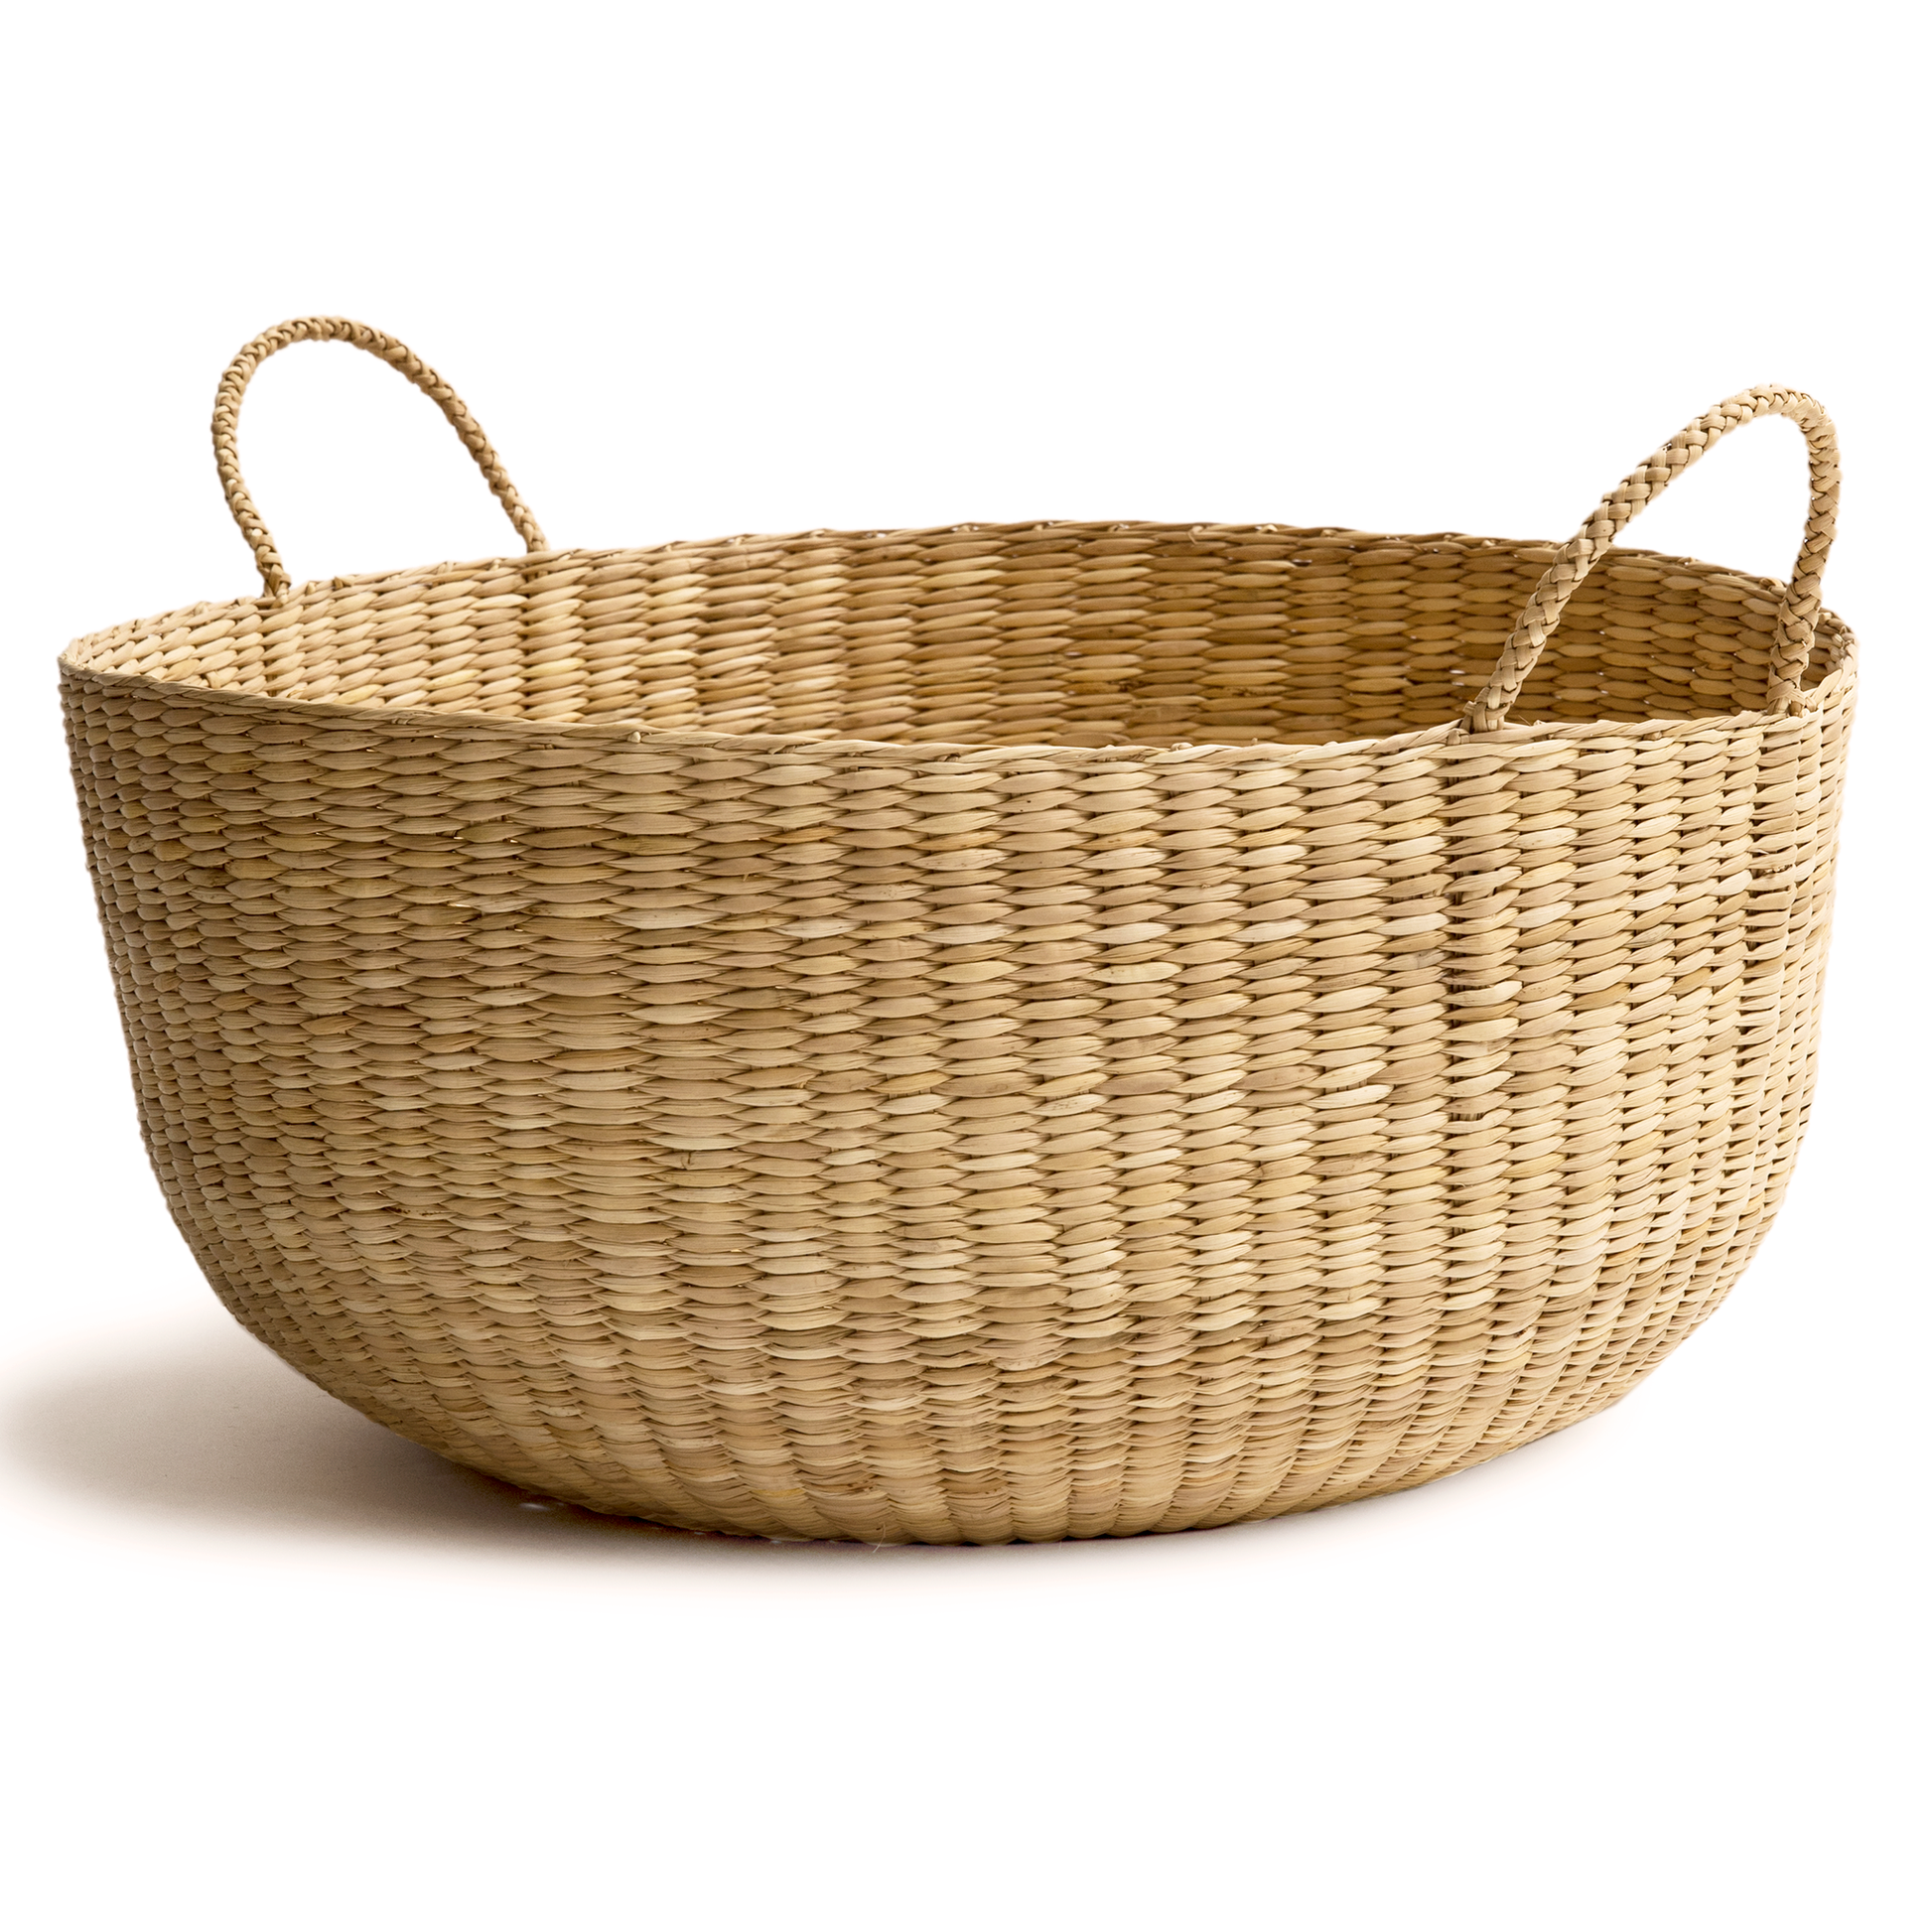 Intiearth junco floor basket for storage and home decor